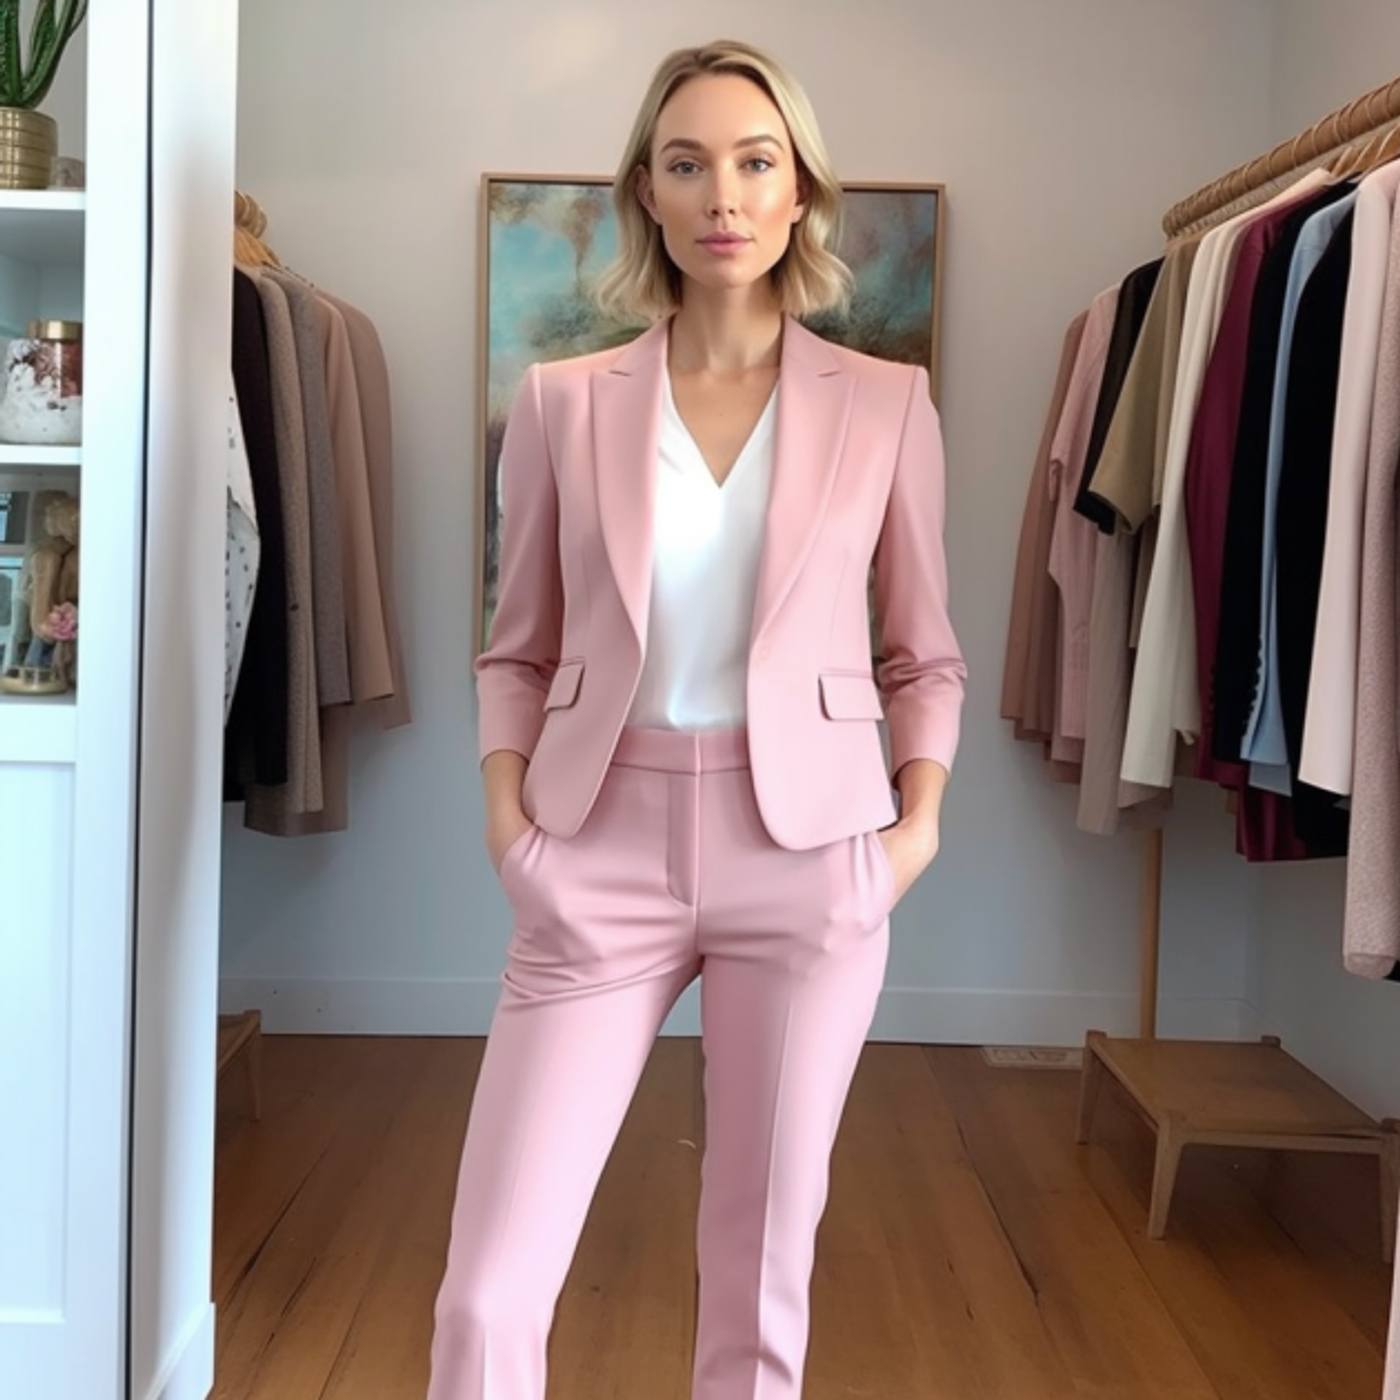 Petite Women's Suits: Styling Tips for Petite Women - Sumissura